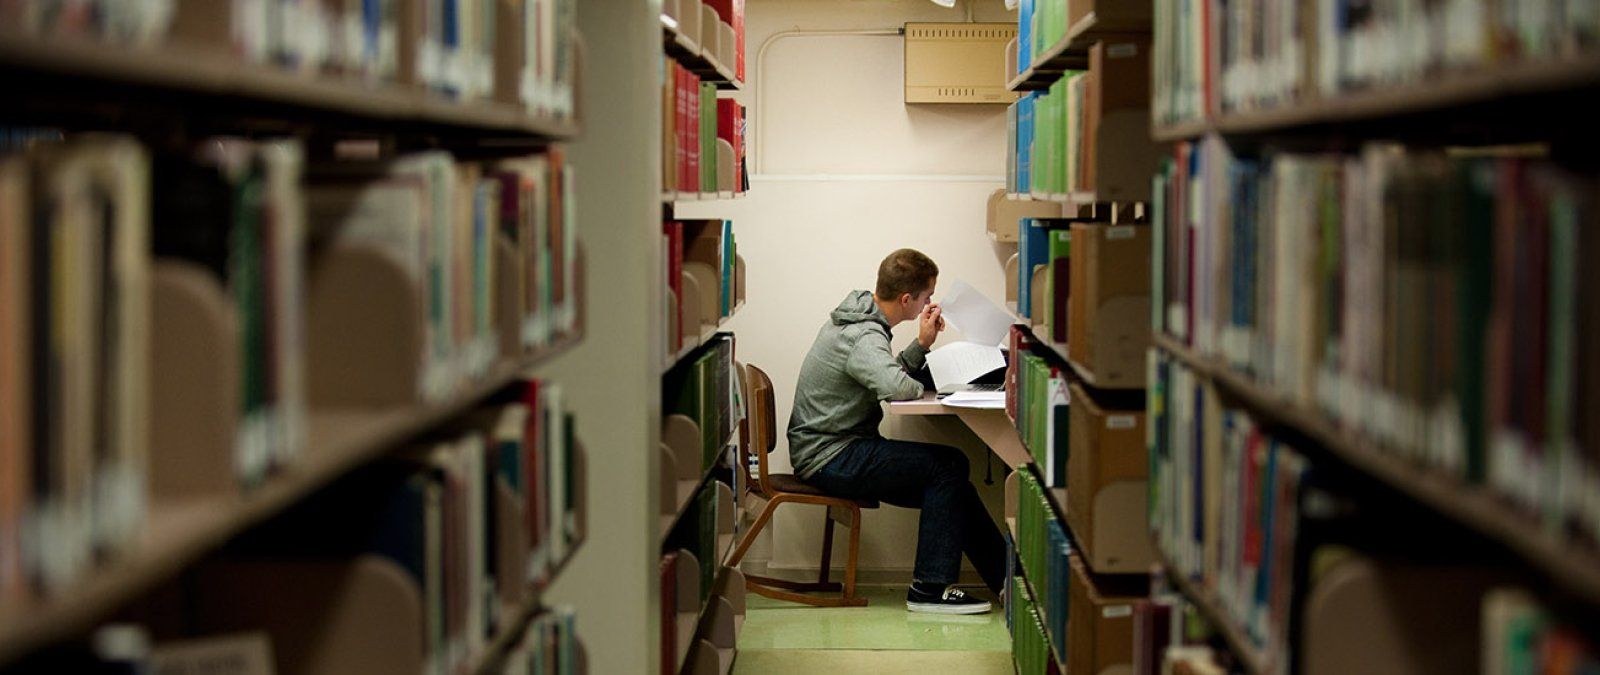 A male student sits studying at a long row of library stacks